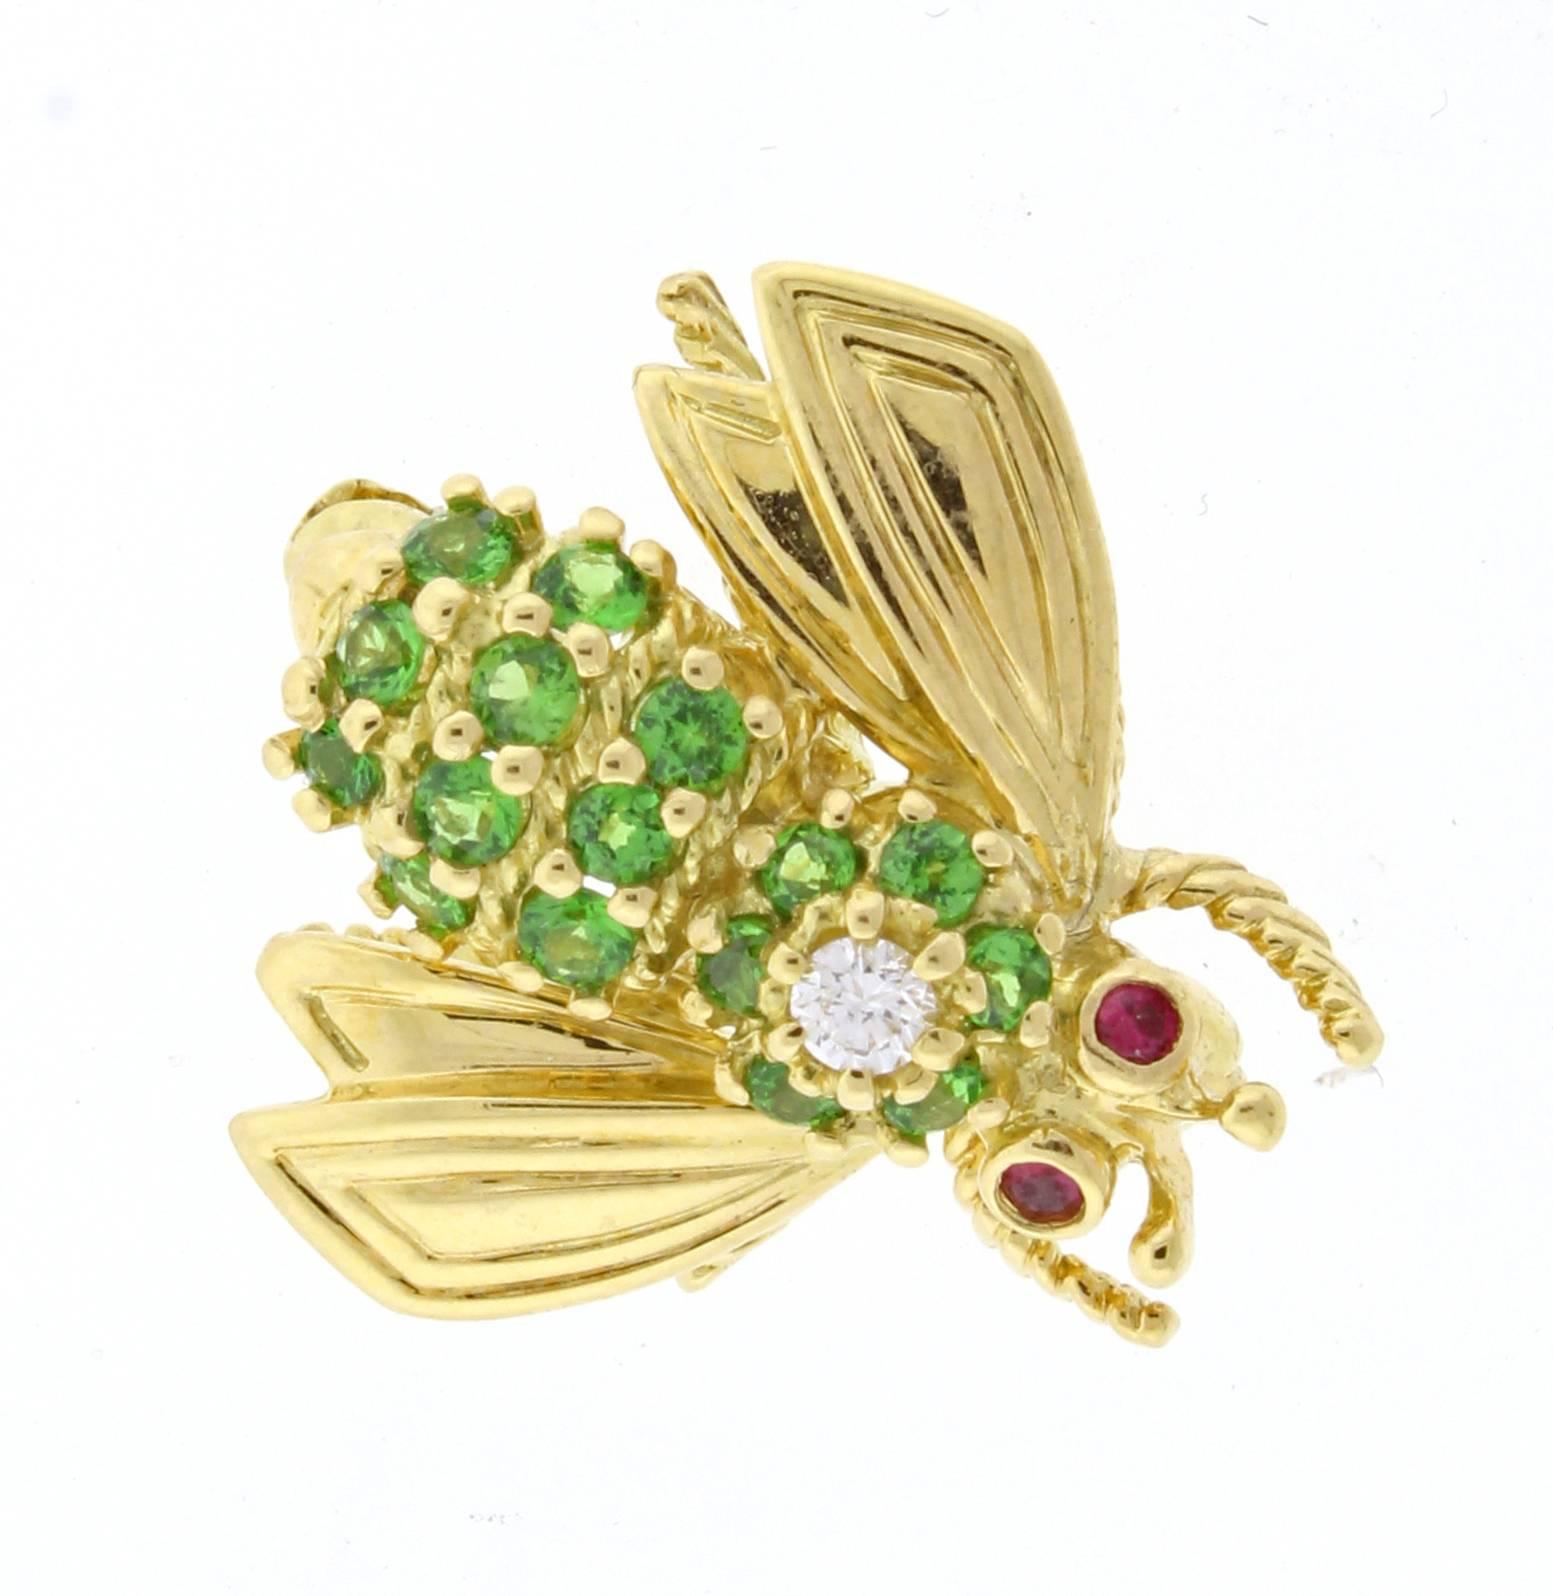 The 18 karat yellow gold Tiffany & Co. tsavorite and diamond bee brooch features 19 green tsavorite garnet weighing  .50 carats and a single brilliant round diamond weighing .06 carats. The brooch measures 3/4 of and an inch from wing to wing